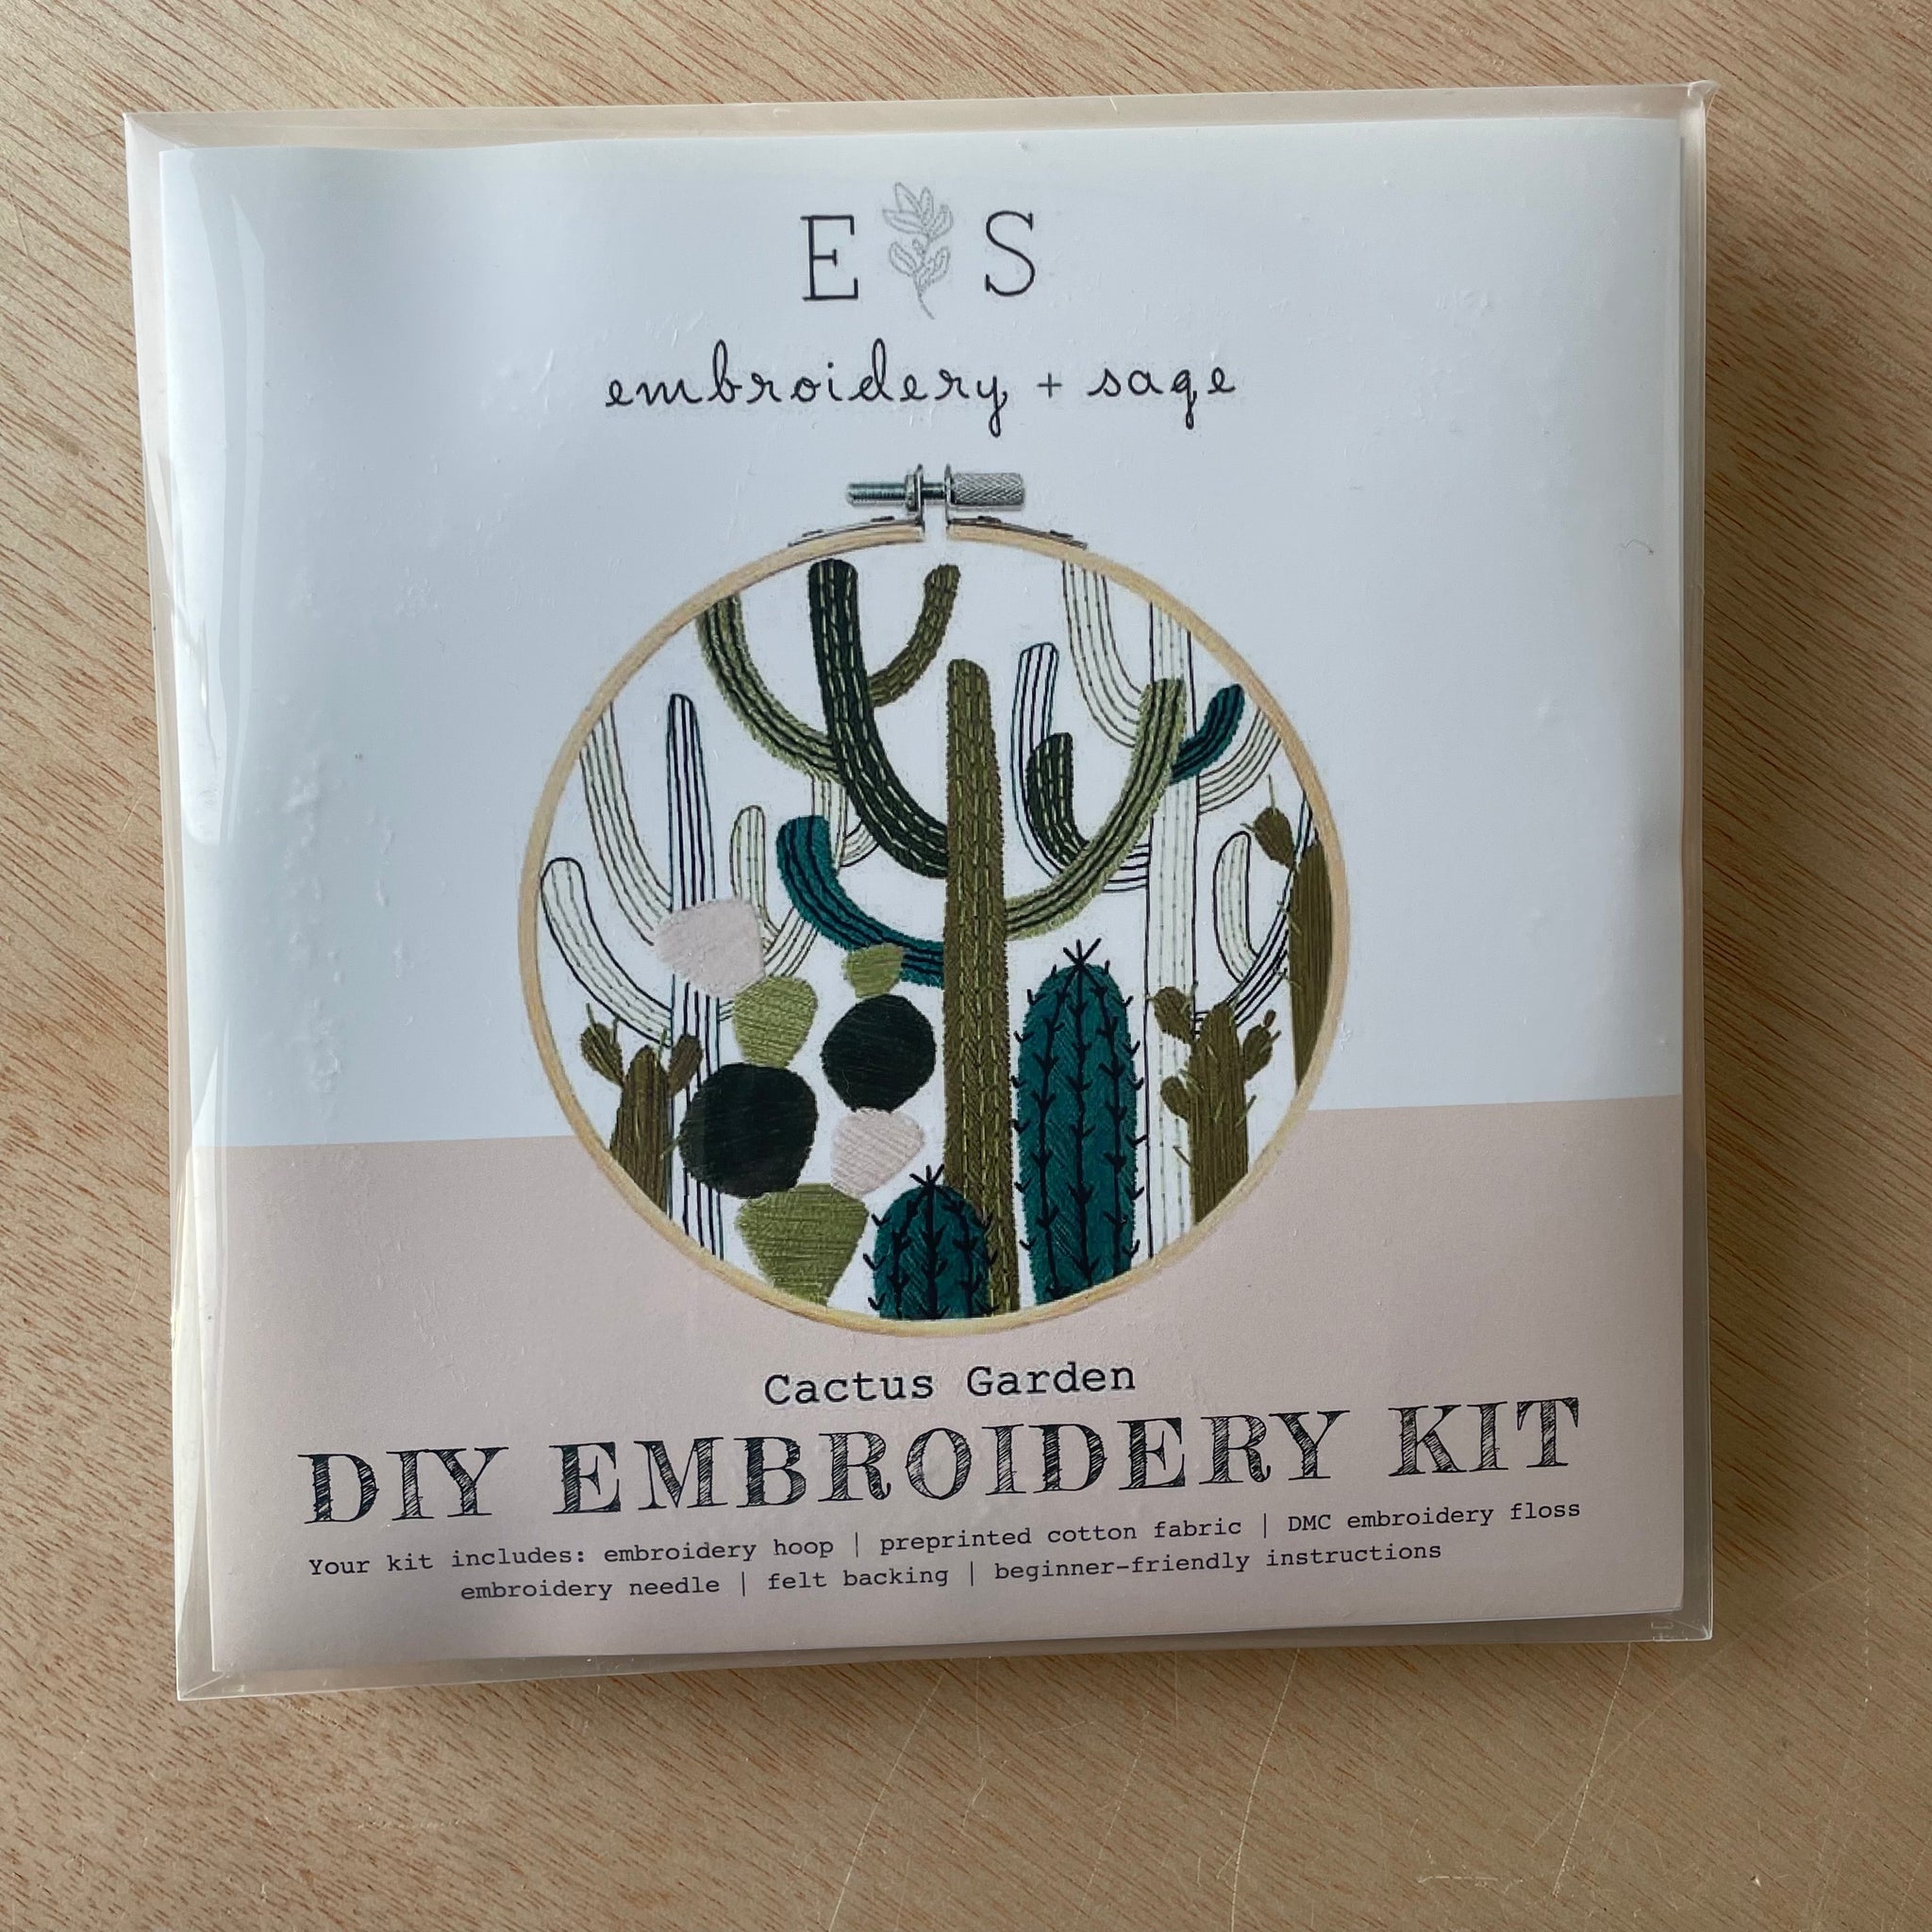 DIY Embroidery Kits by Embroidery and Sage